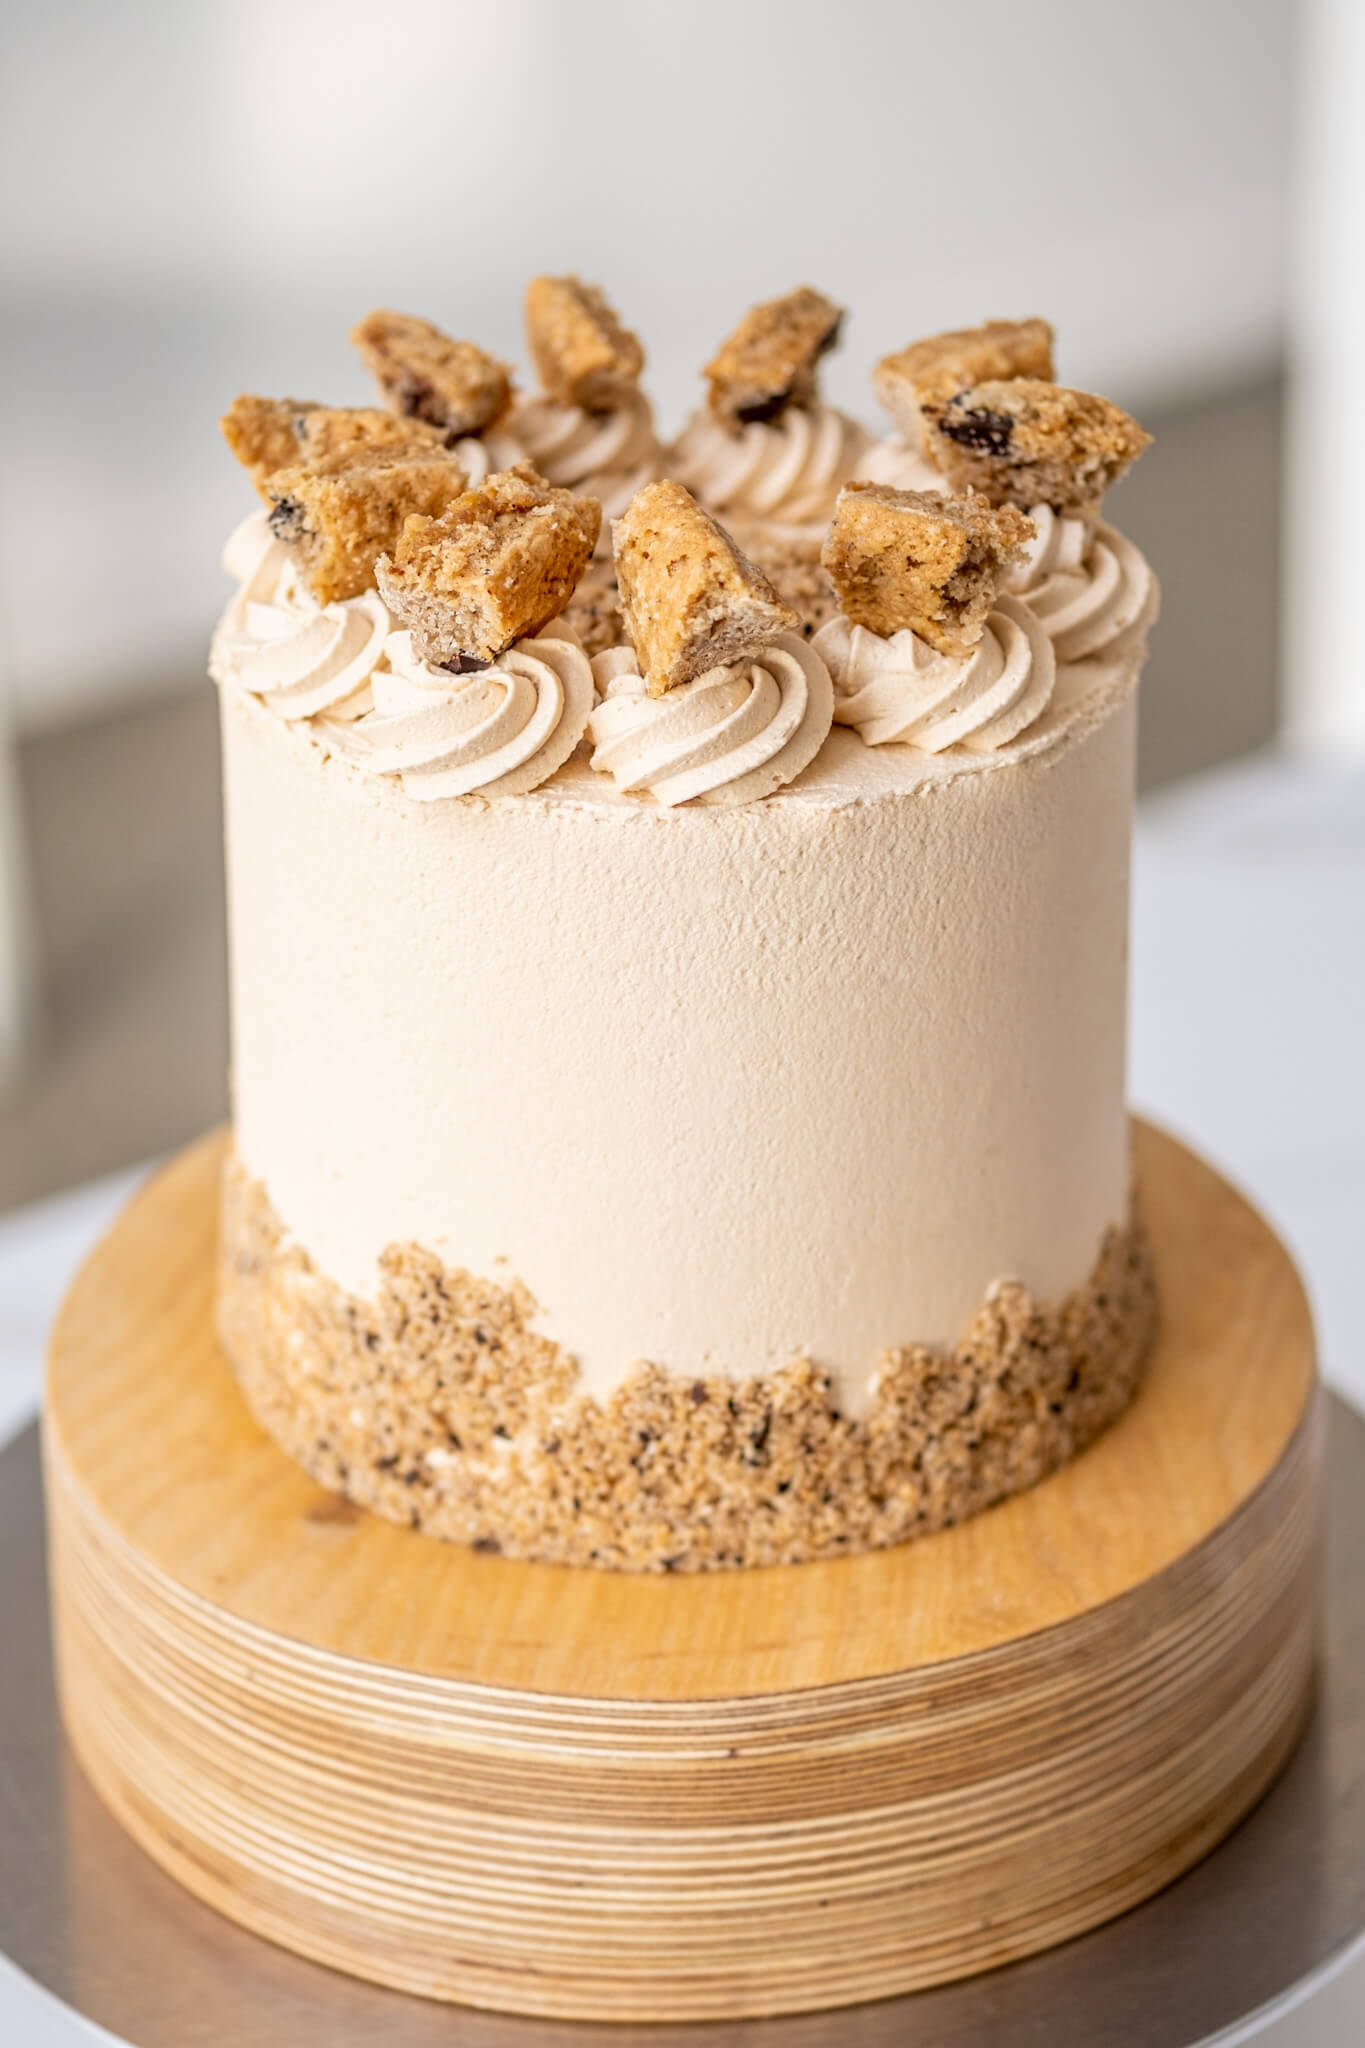 Vegan layer cake with Biscoff-flavoured buttercream icing and decorated with chunks and crumbs of oatmeal-chocolate cake.